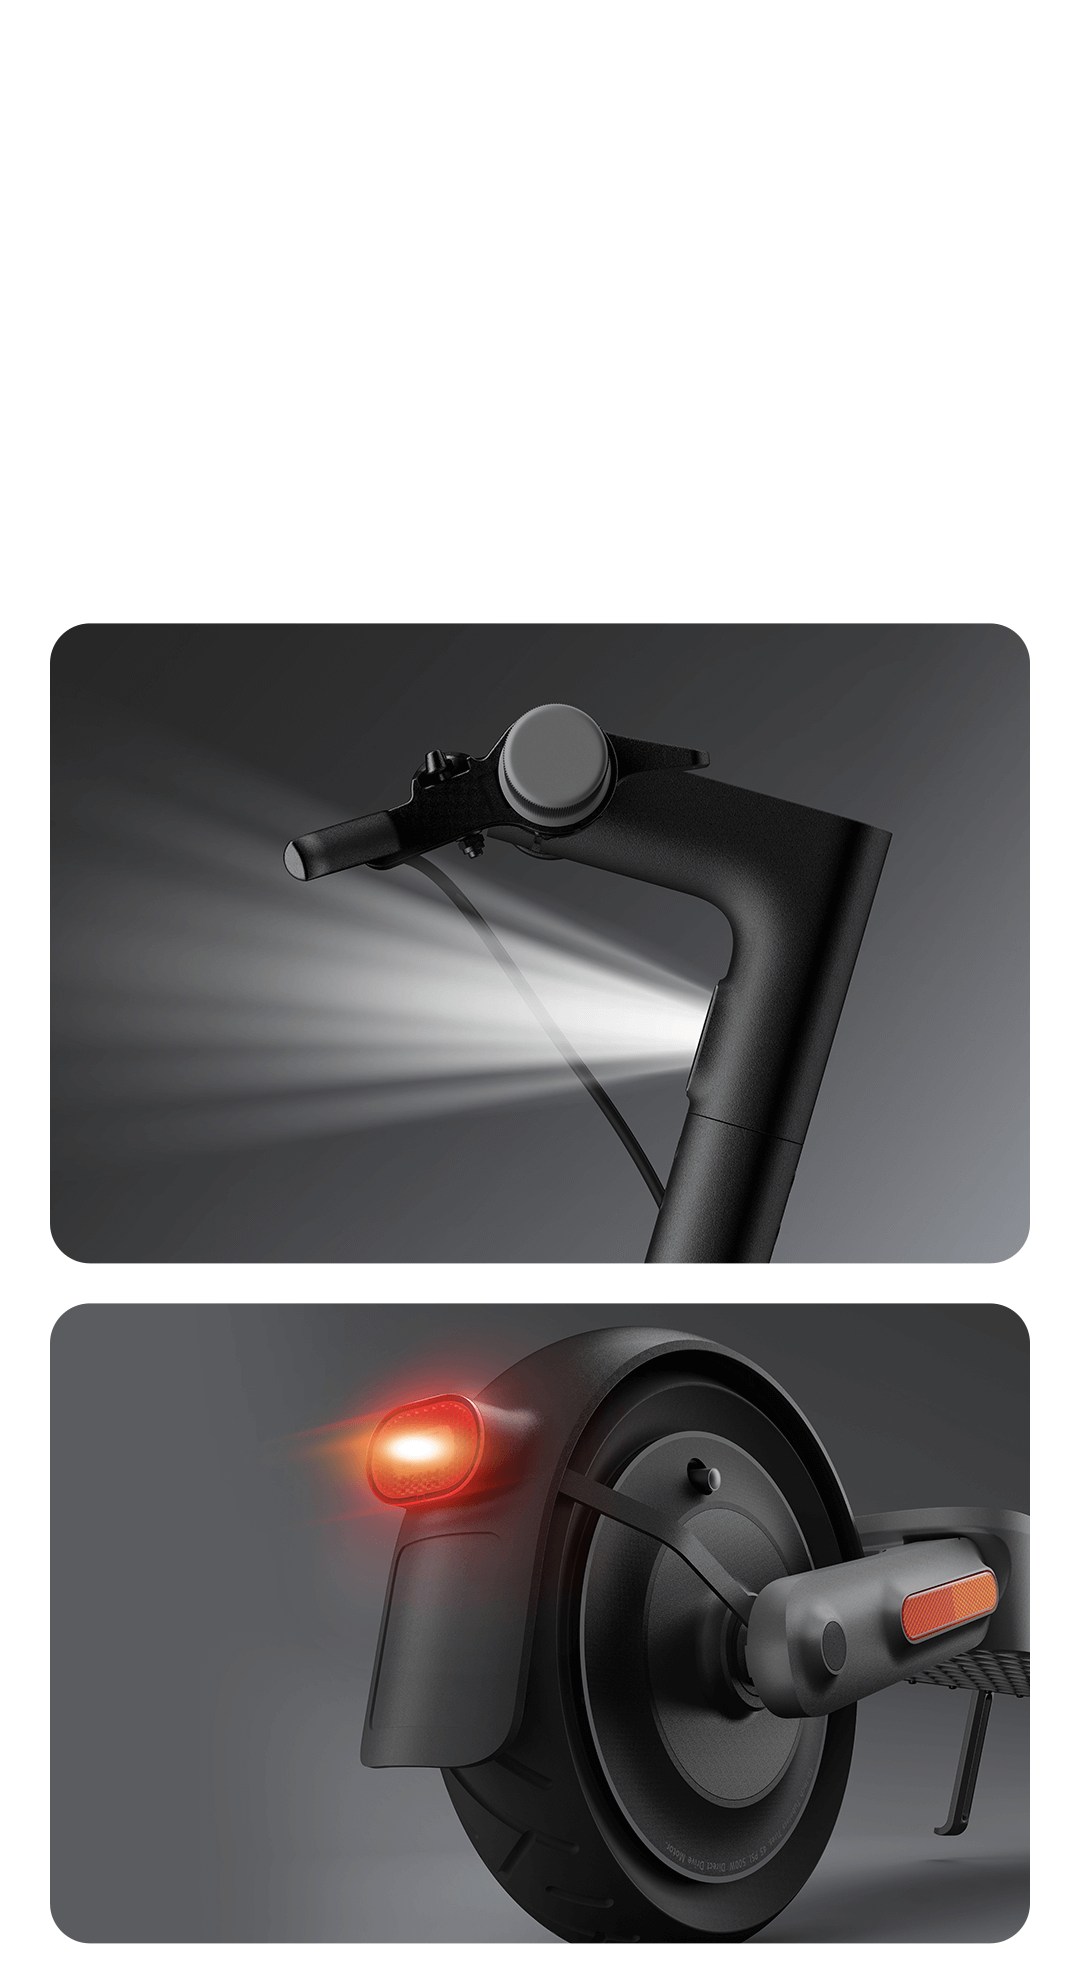  Xiaomi Electric Scooter 4 Pro, 55km Super Long Range, 25km/h  Max. Speed, 700W Max. Power, 20% Incline Climb, 130mm Dual-disc Brake, 10  Tubeless Self-Sealing Tires, Upgraded Size, Black : Sports 